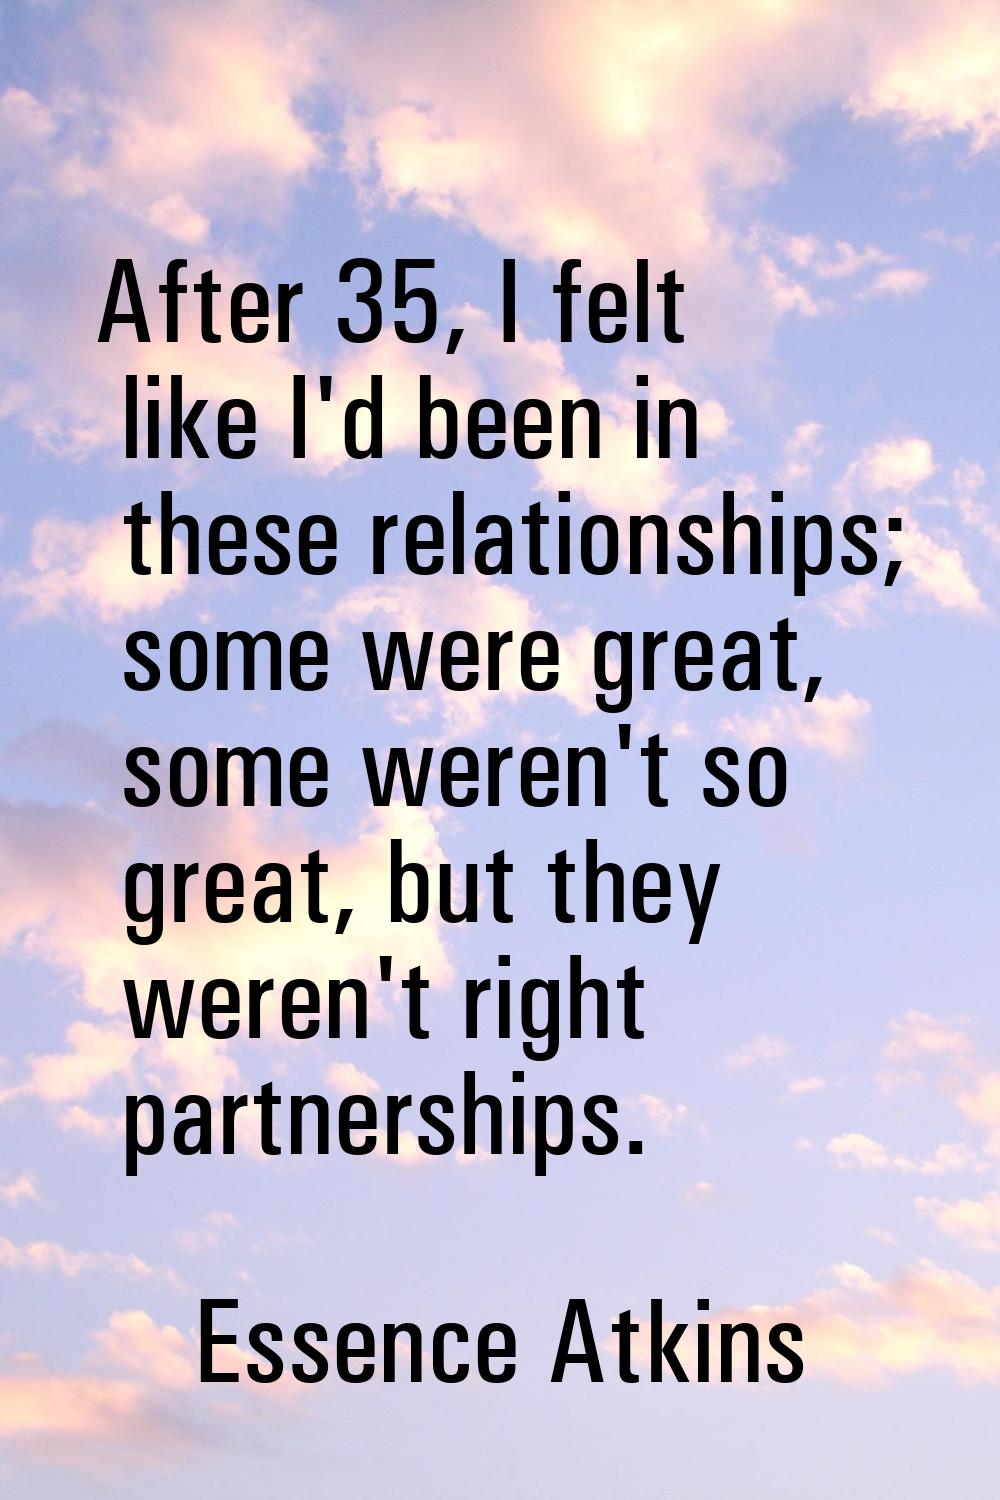 After 35, I felt like I'd been in these relationships; some were great, some weren't so great, but 